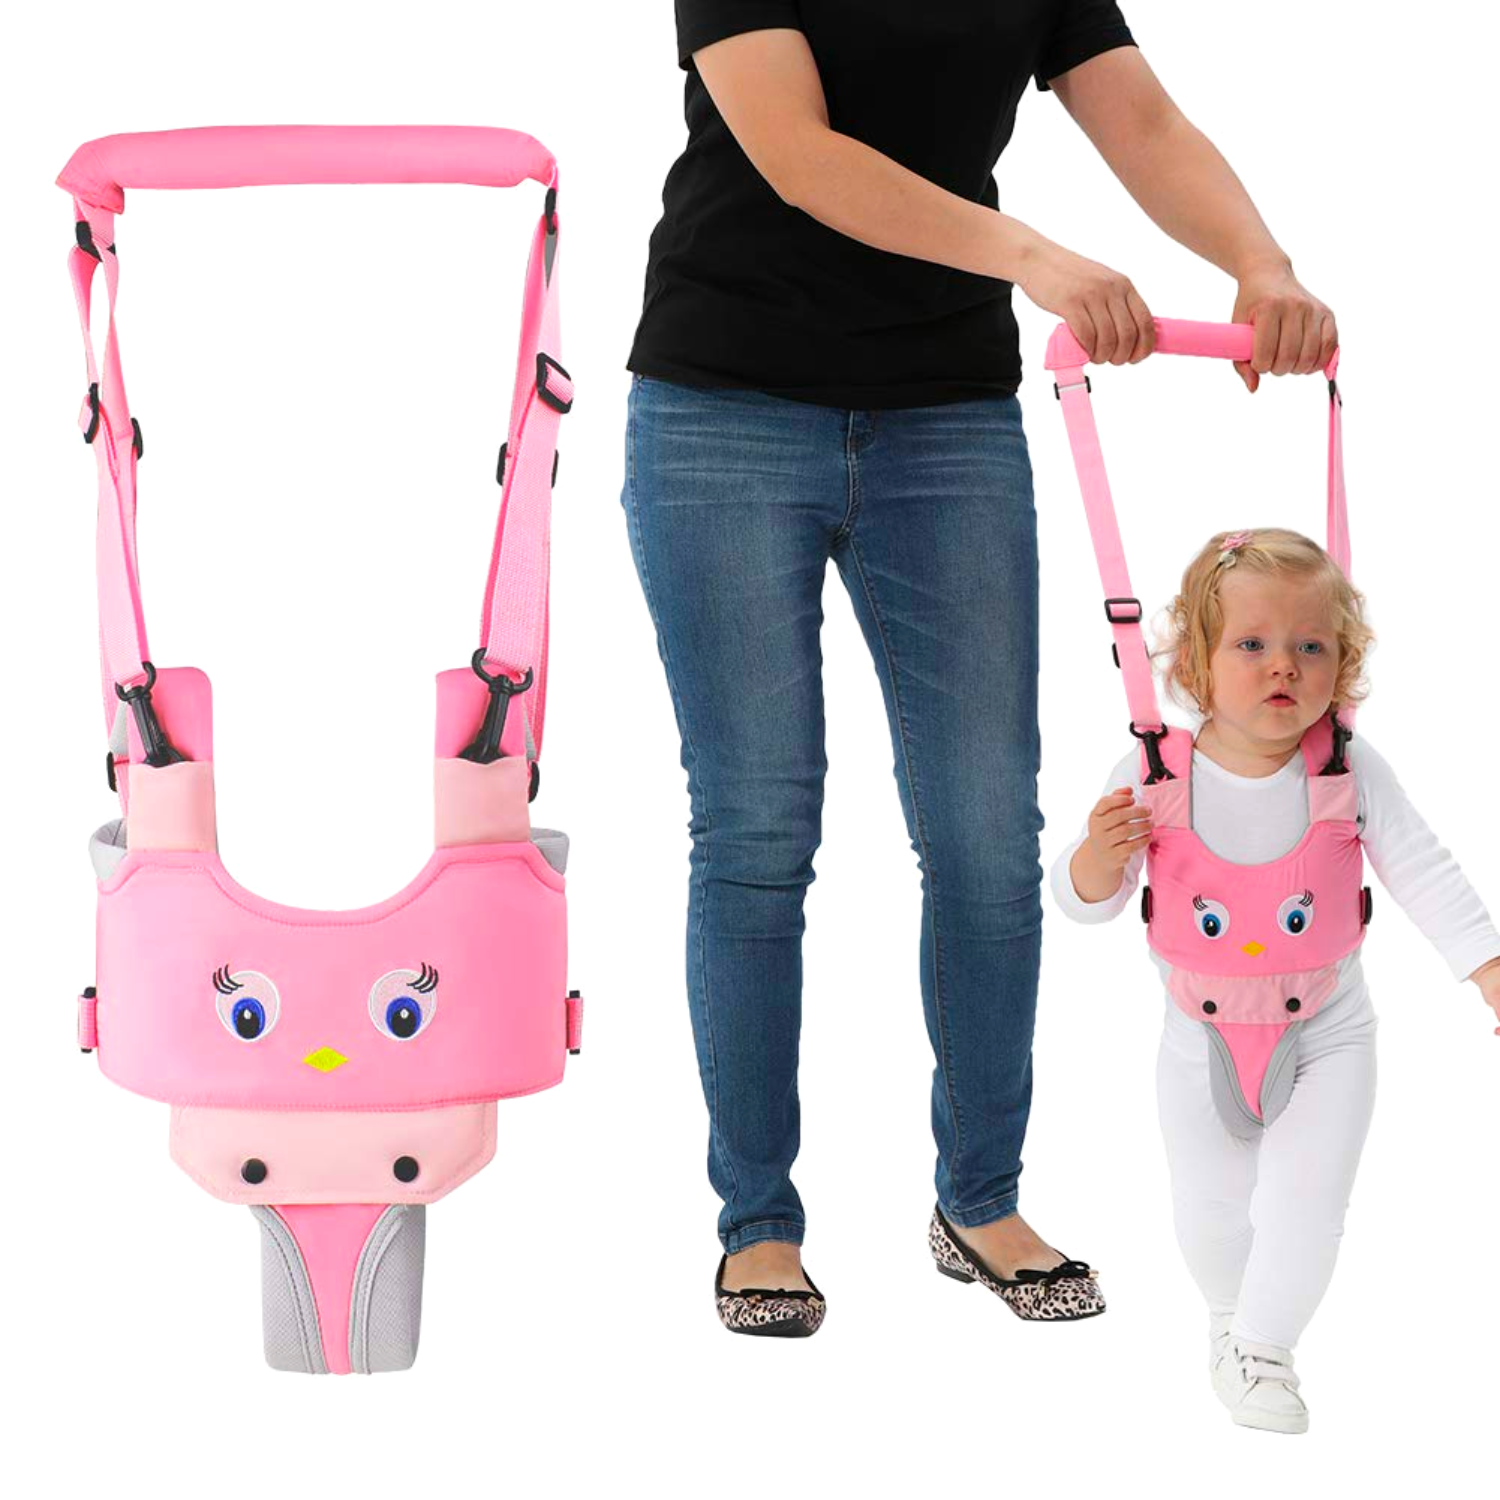 Baby Walking Assistance Harness